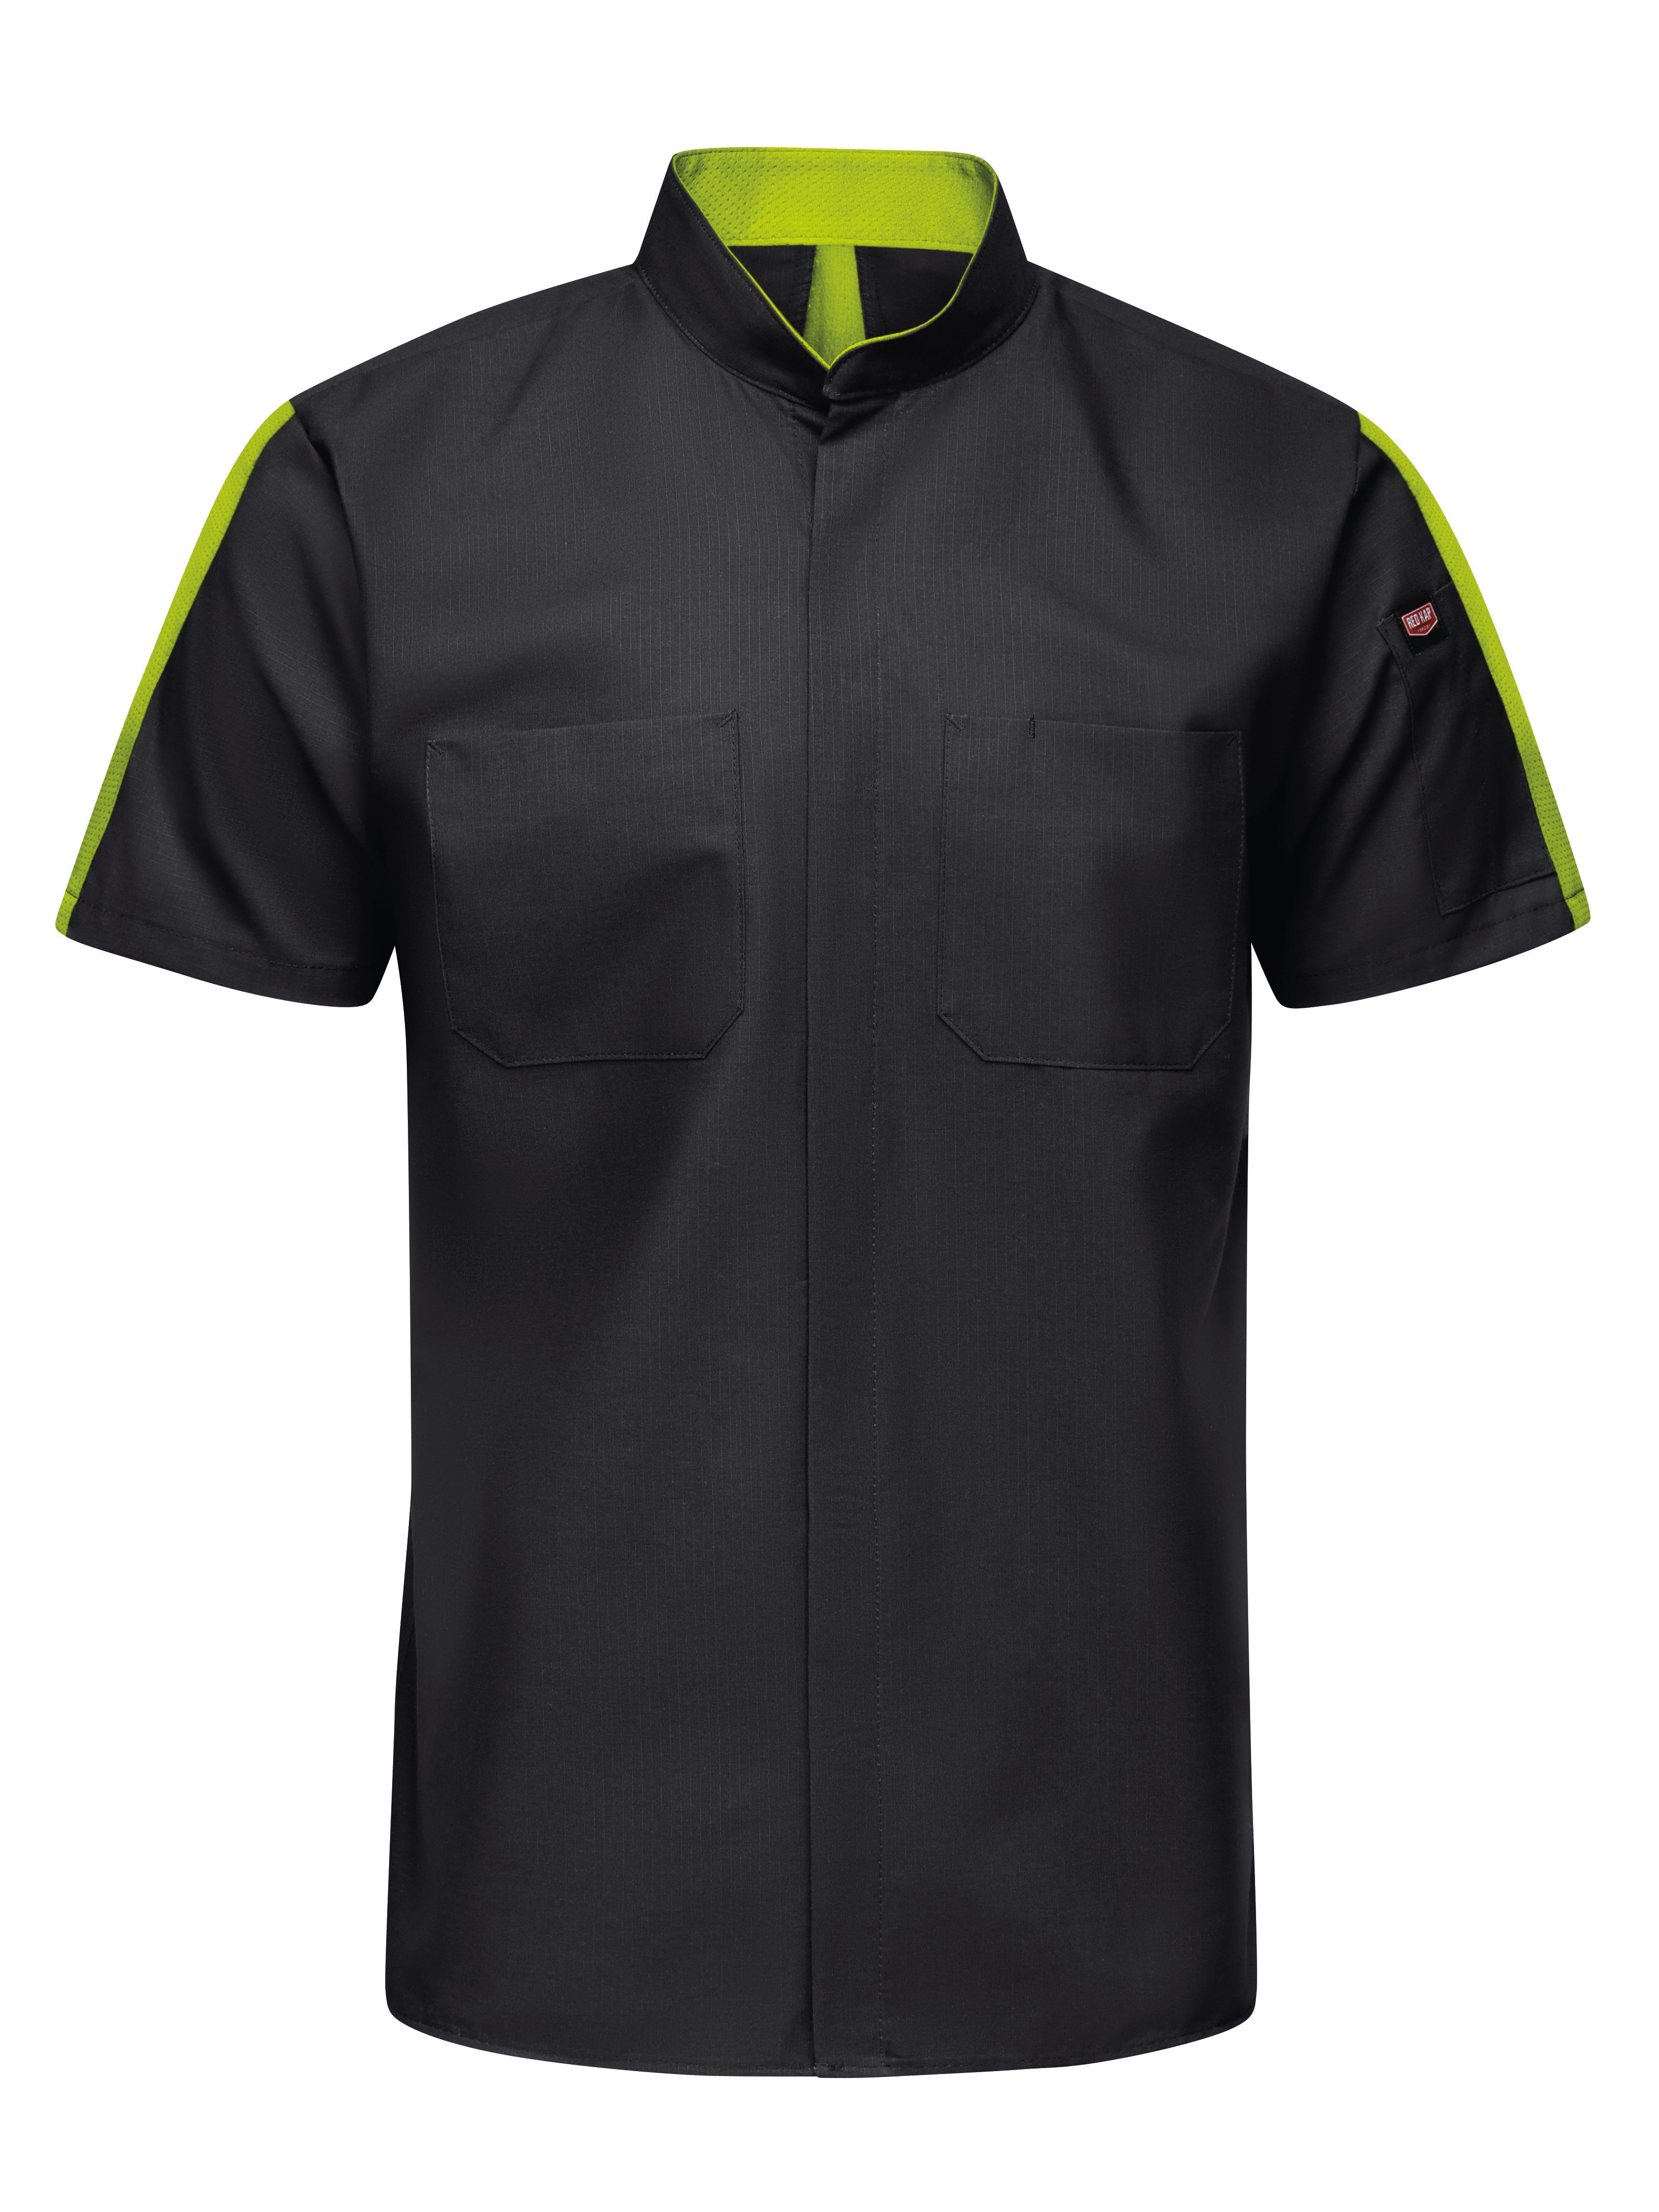 Red Kap Men's Short Sleeve Two Tone Pro+ Work Shirt with OilBlok and Mimix